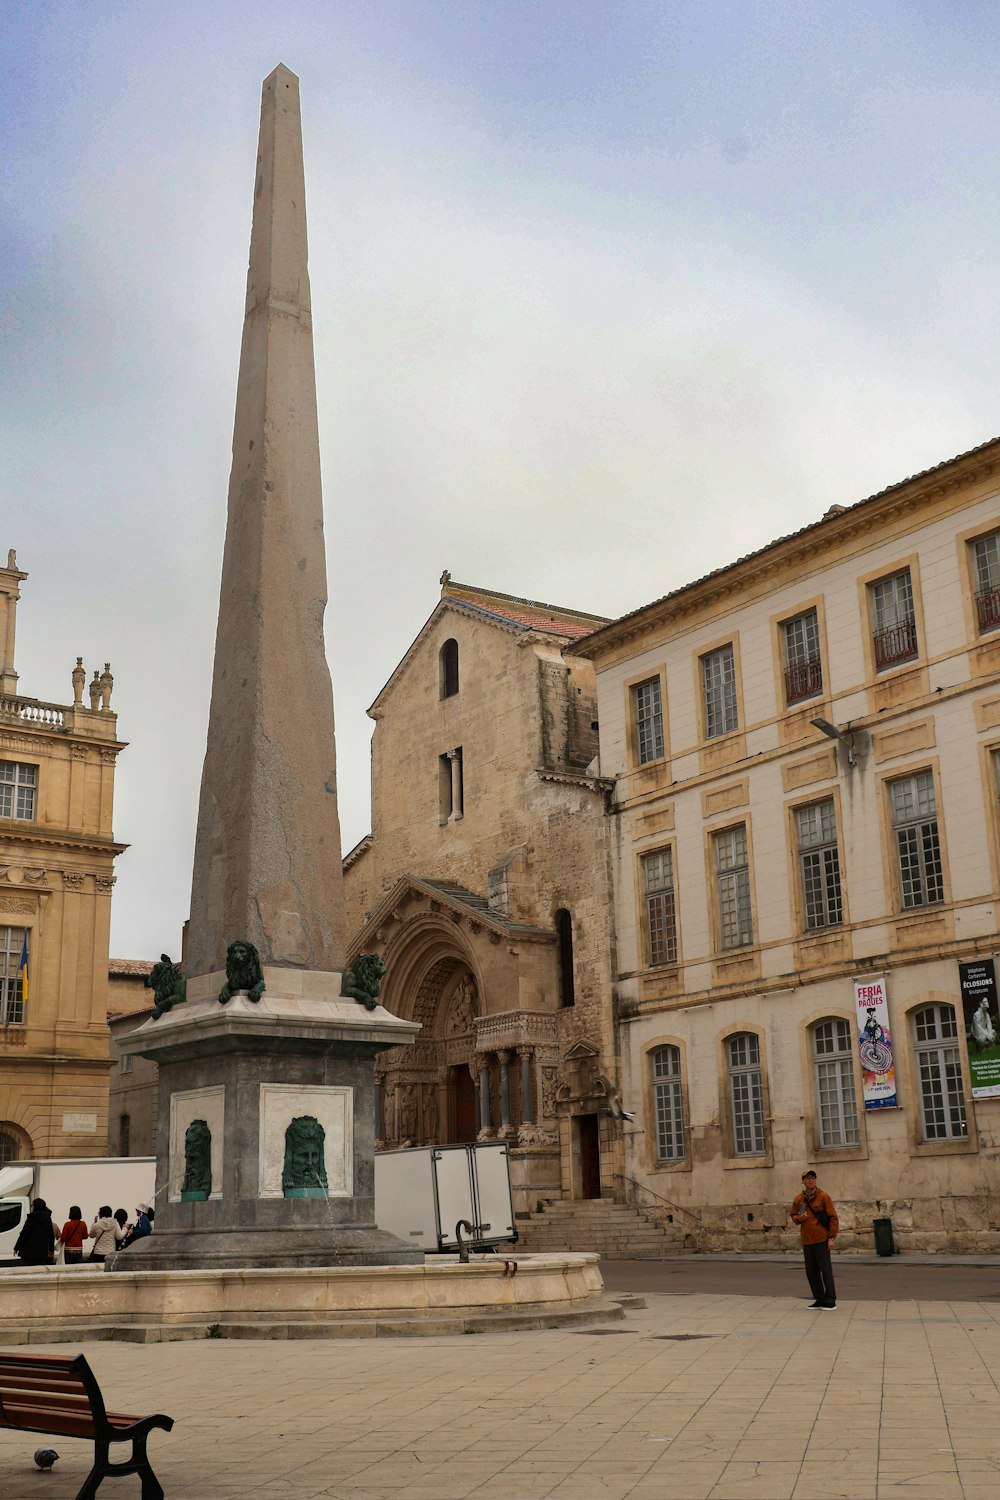 a tall obelisk sitting in the middle of a courtyard